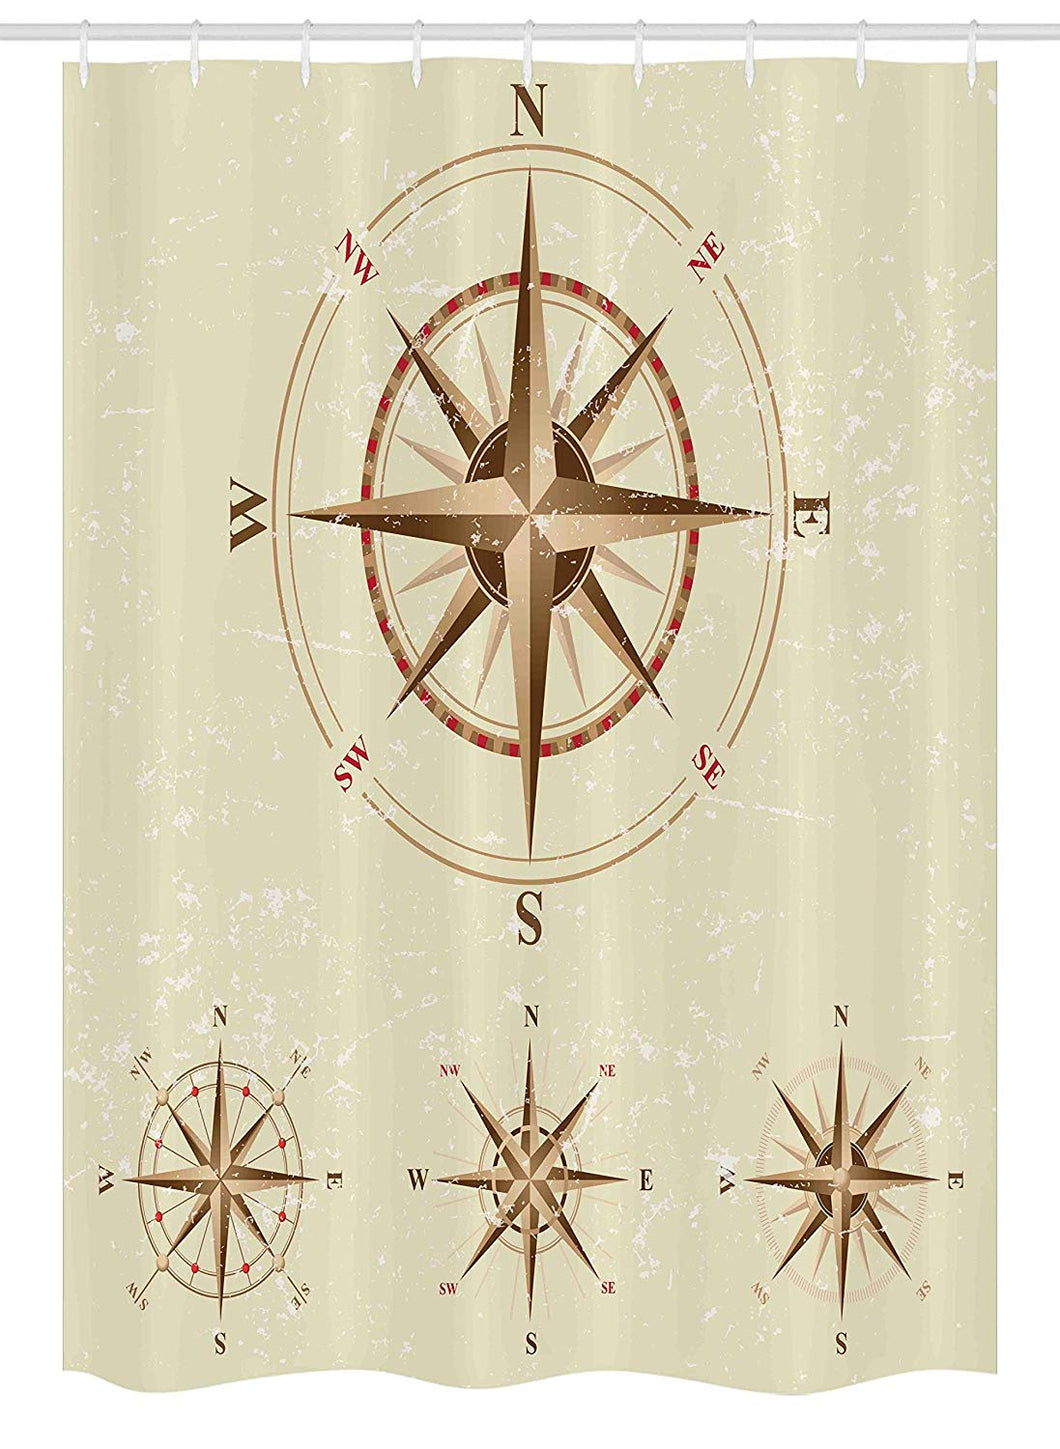 Ambesonne Compass Stall Shower Curtain, Four Different Compasses in Retro Colors Discovery Equipment Where Nautical Marine, Fabric Bathroom Decor Set with Hooks, 54 W x 78 L Inches, Beige Tan